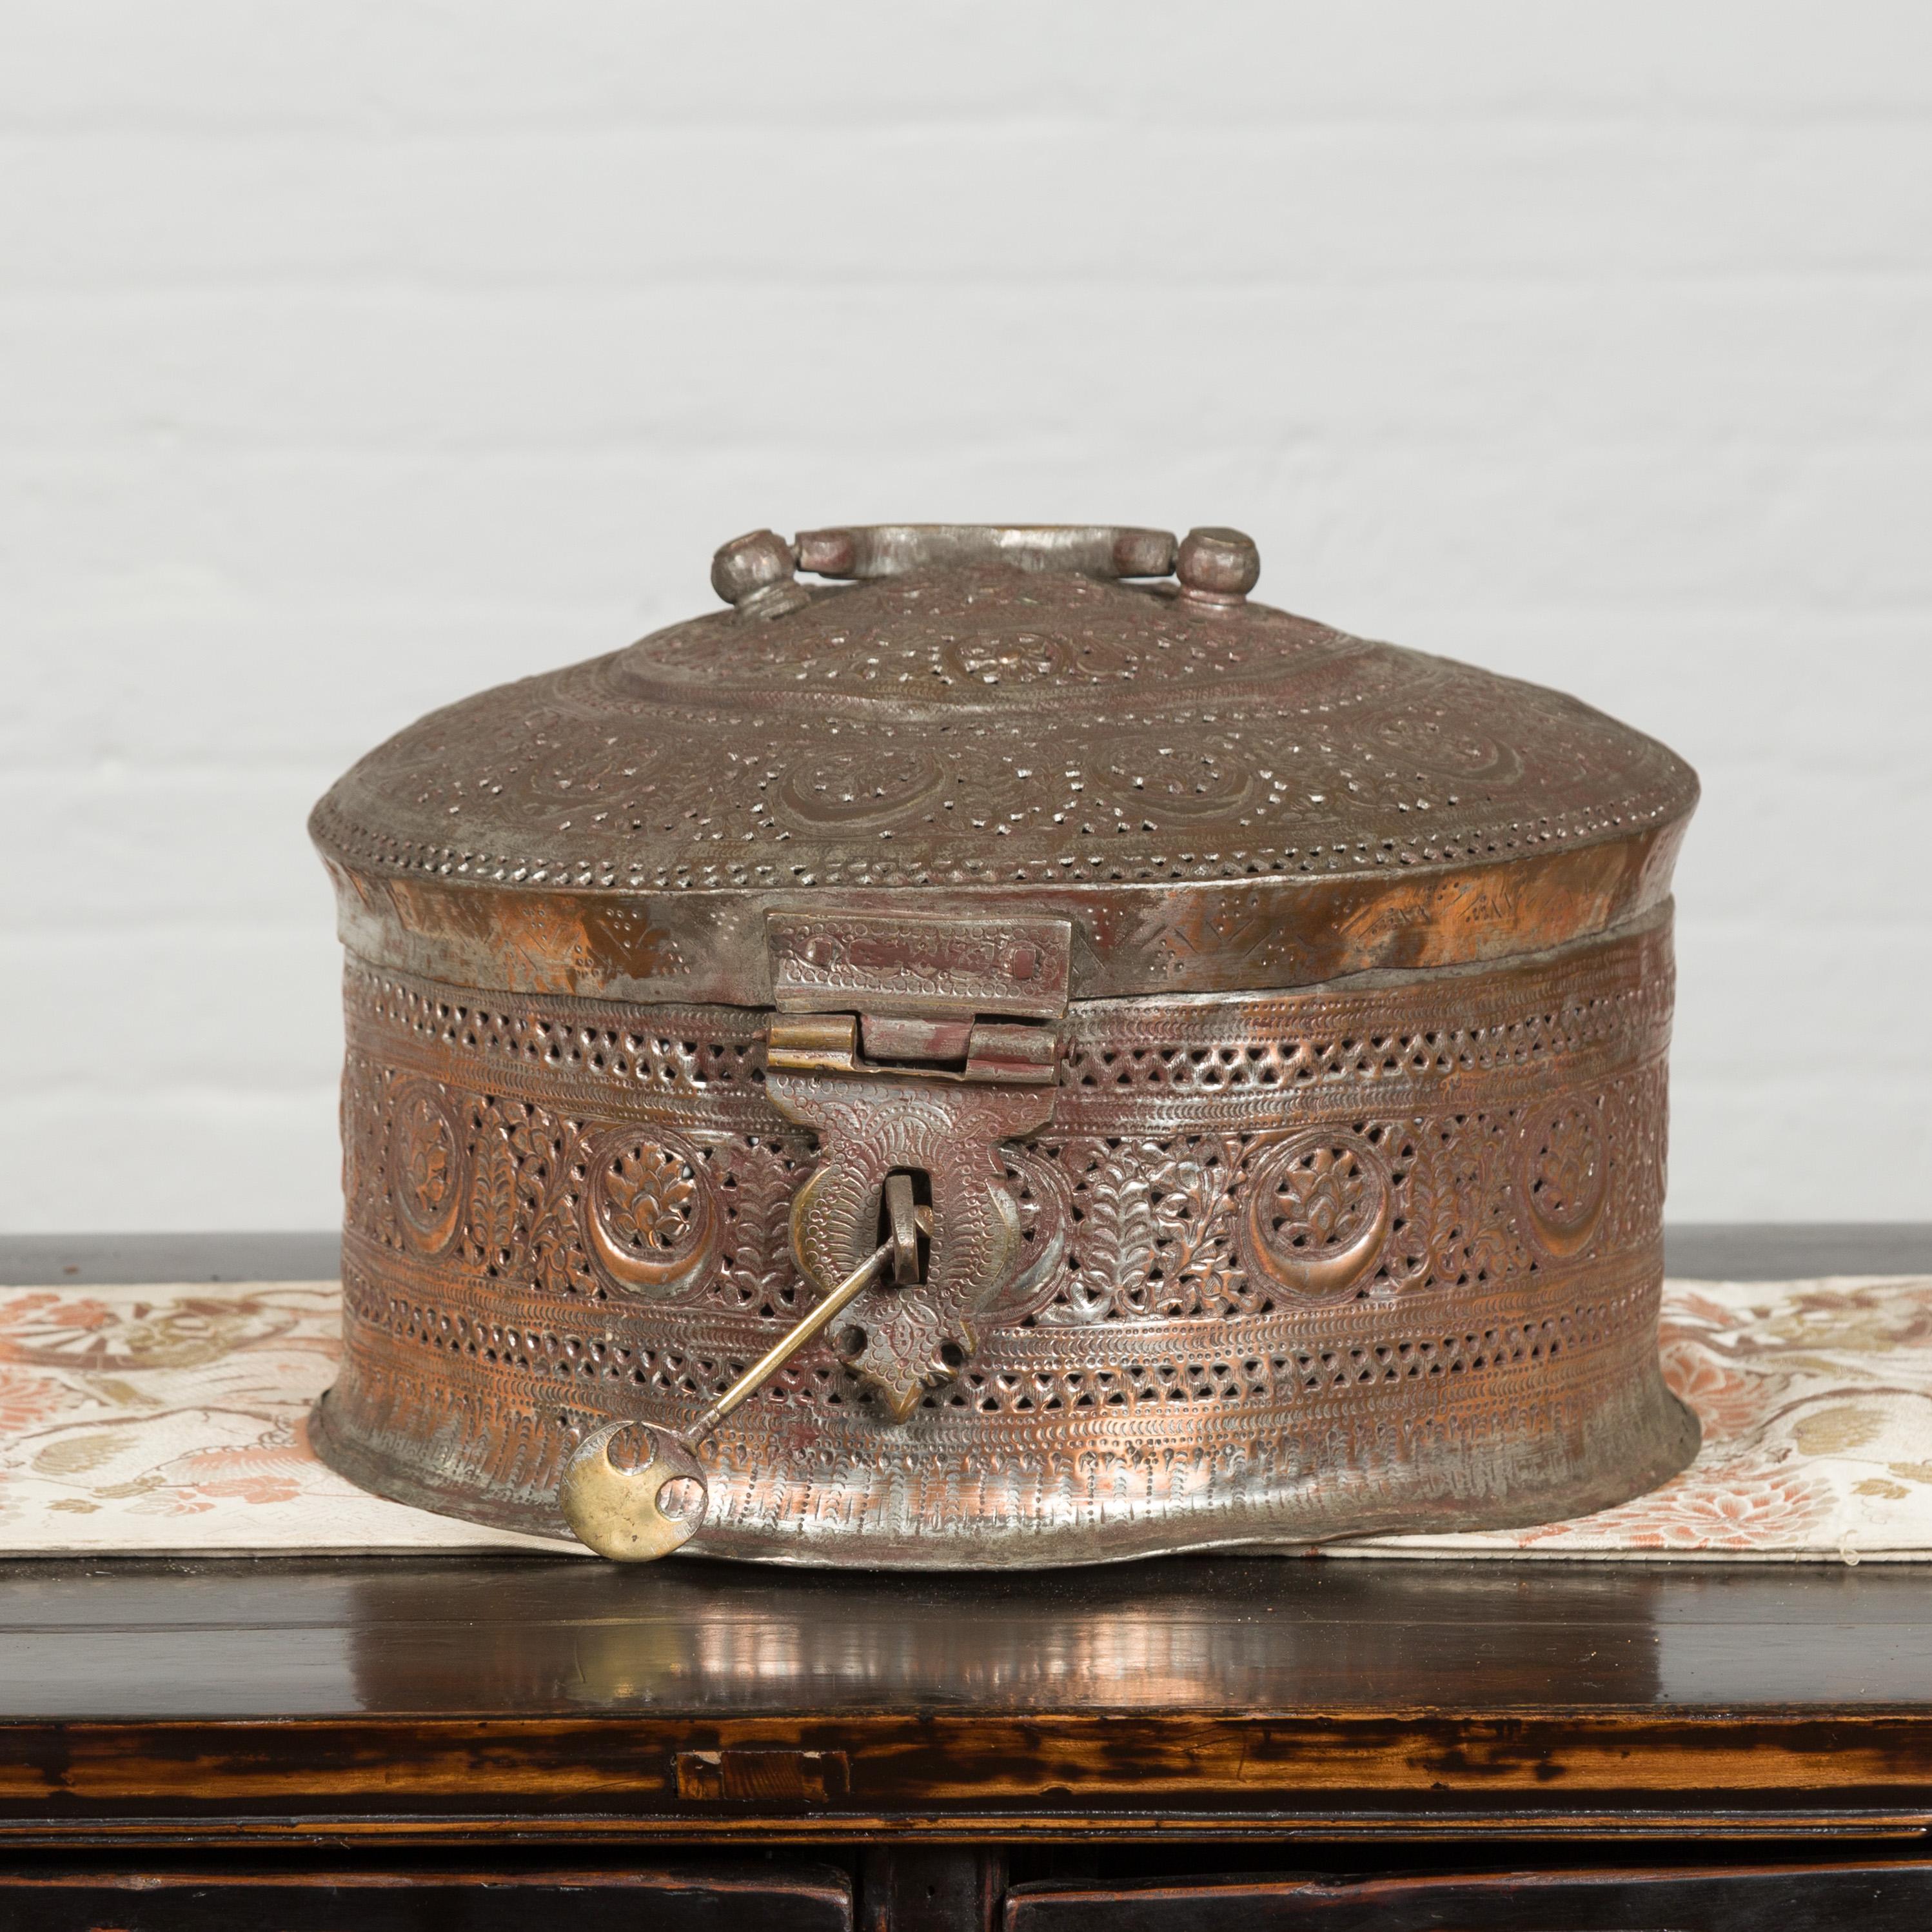 An Indian silver plated metal box from the 19th century with pierced foliage motifs. Created in India during the 19th century, this silver plated metal box attracts our attention with its circular pierced body adorned with an abundance of foliage